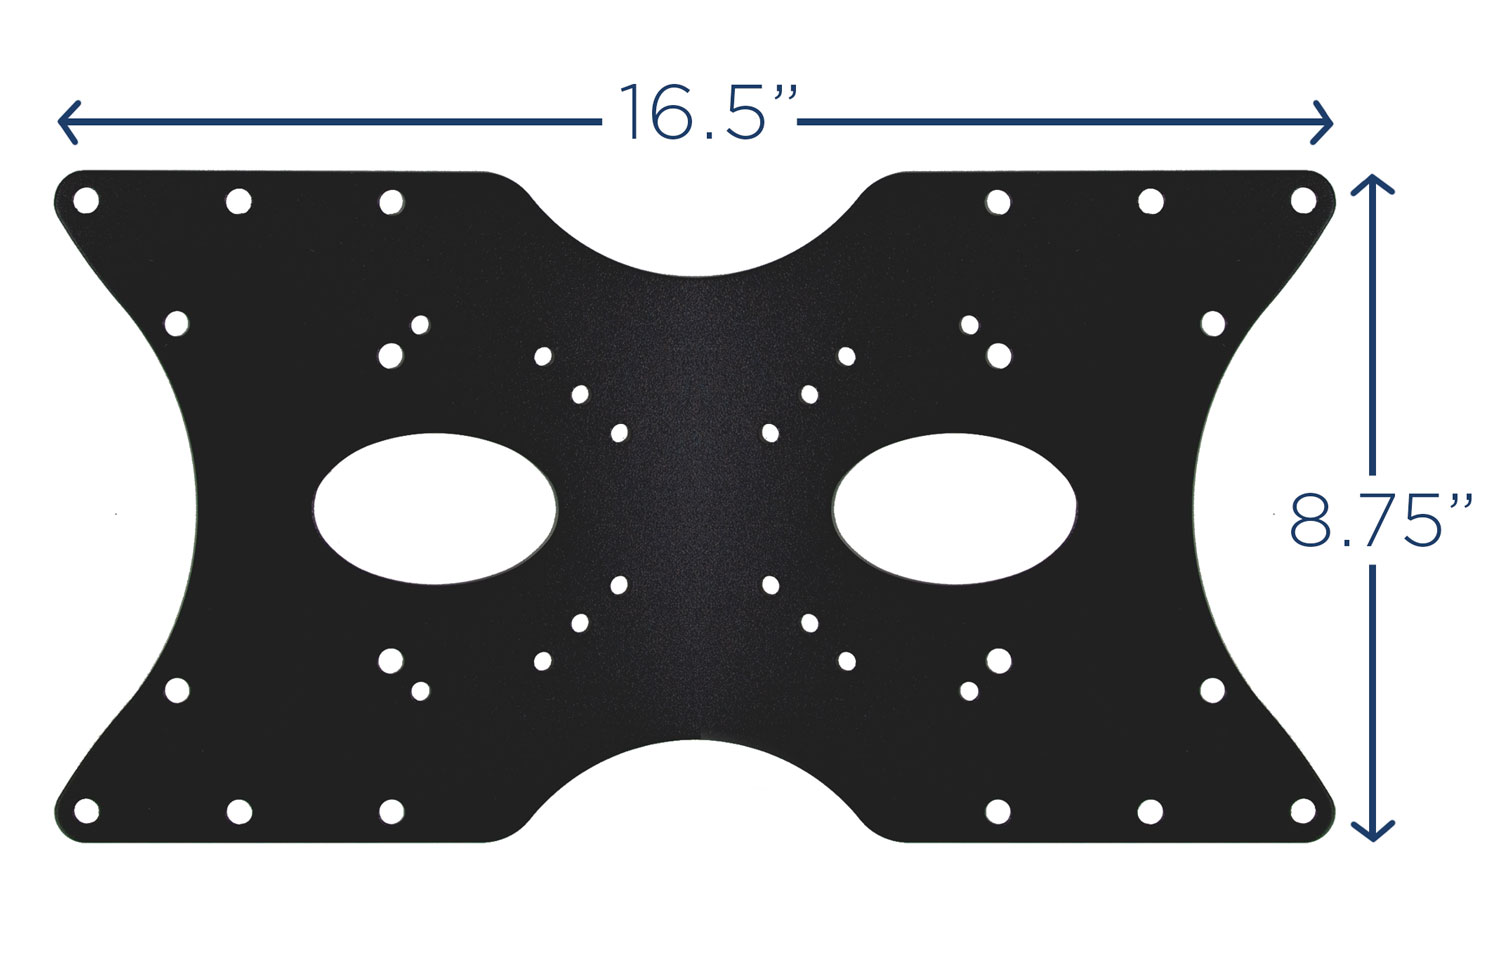 Mount-It! VESA Mount Adapter Plate | Conversion Kit Allows 75x75, 100x100, 200x200 to Fit Up to 400x200 mm Patterns - image 2 of 7